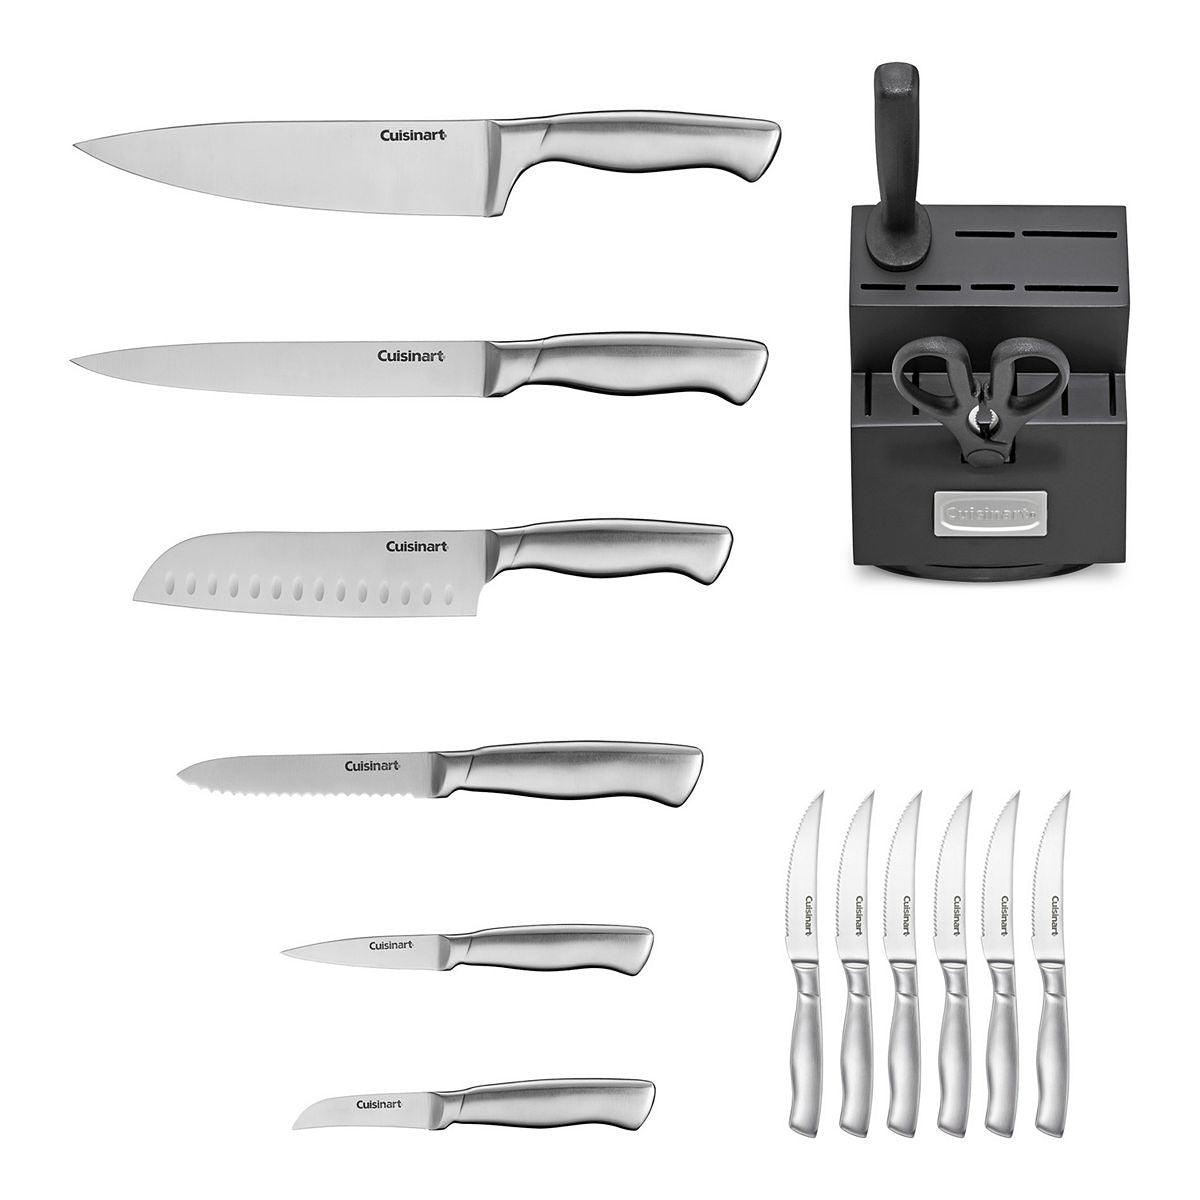 Cuisinart C77SS-15PBR 15PC Stainless Steel Rotating Cutlery Block Set